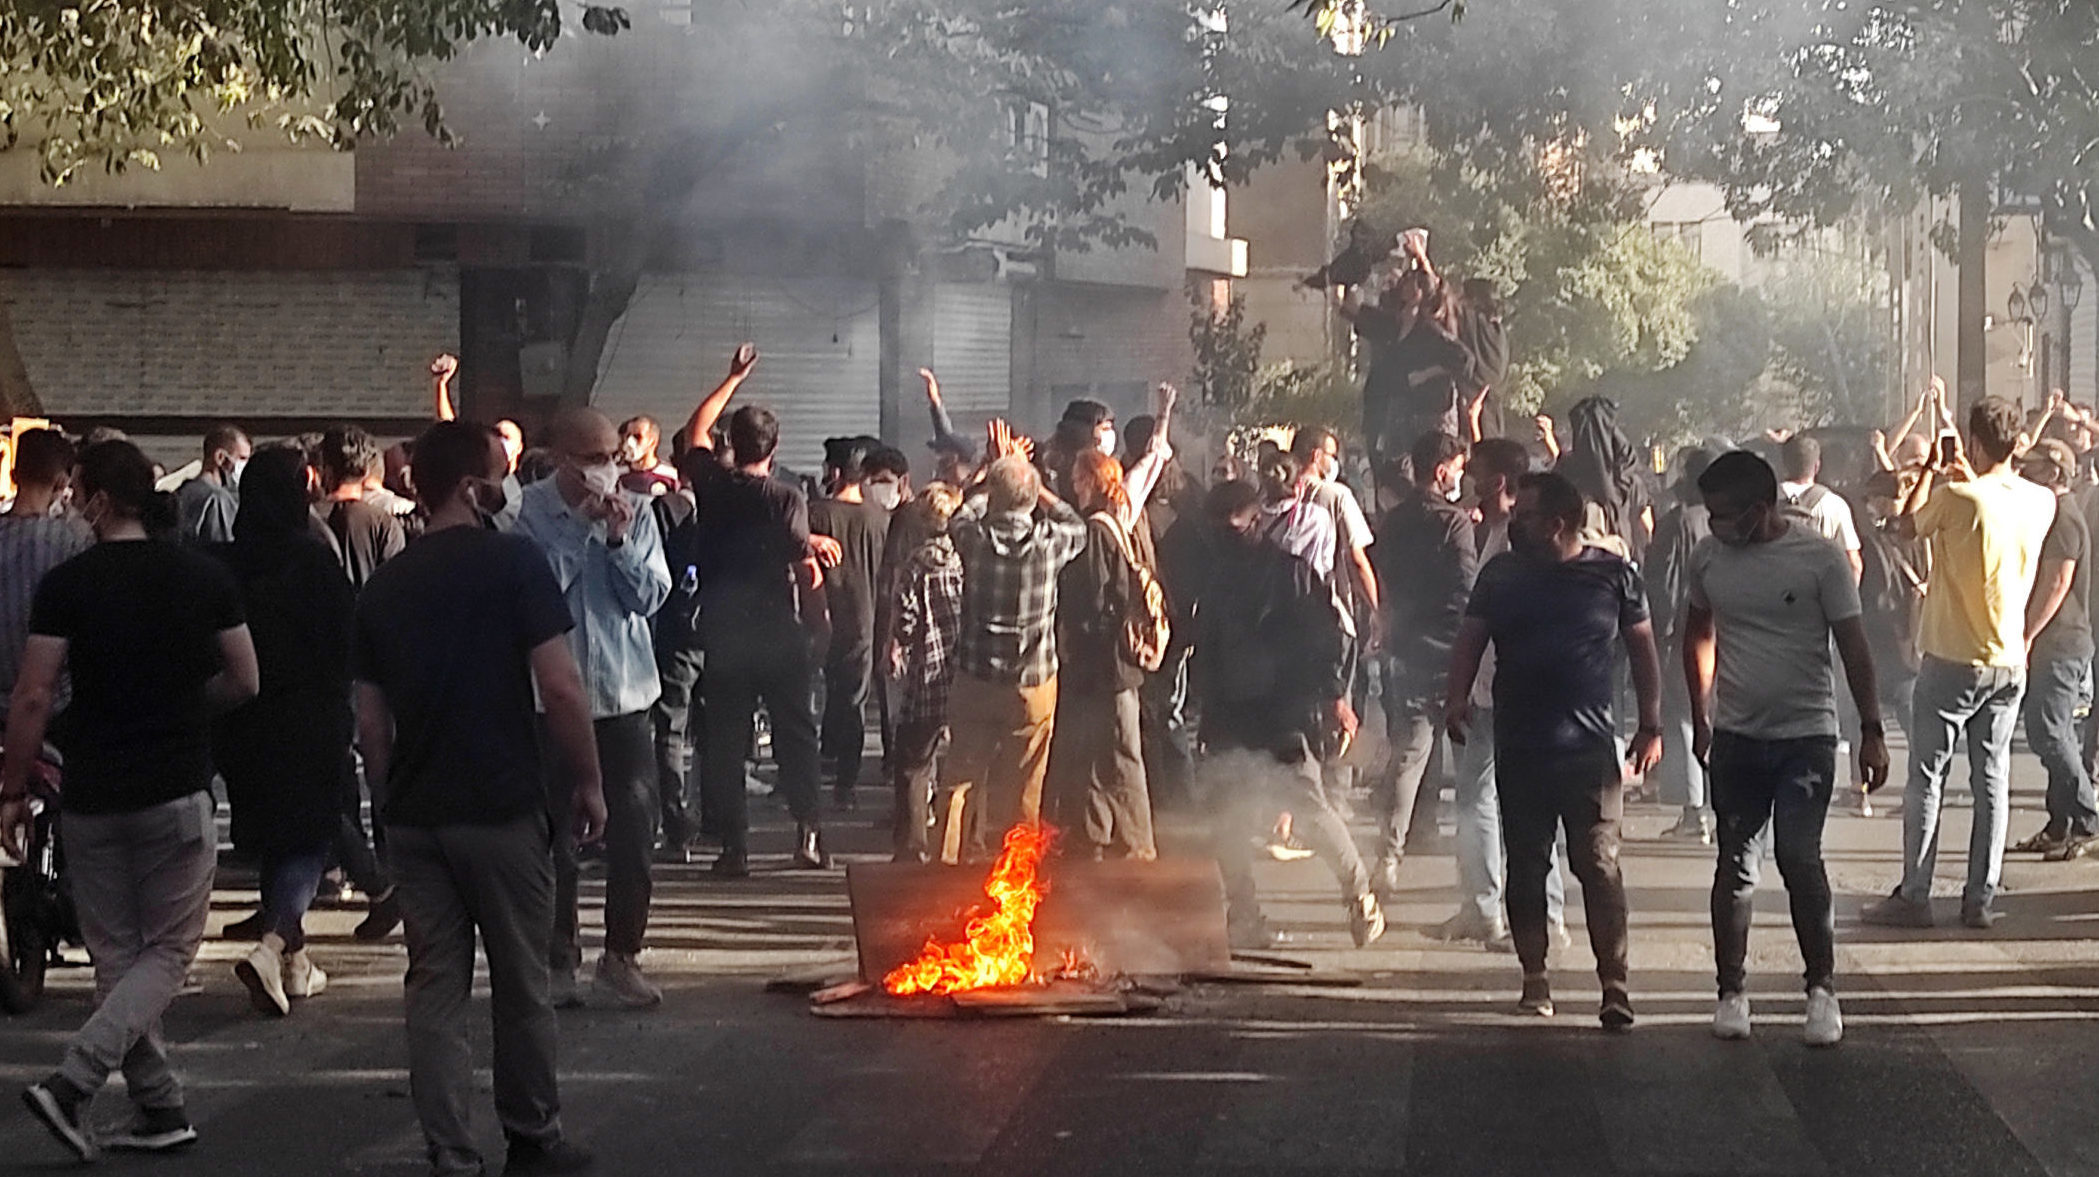 Hundreds Charged for Participating in Iran Anti-Government Protests, UNHRC Could Meet on Iran